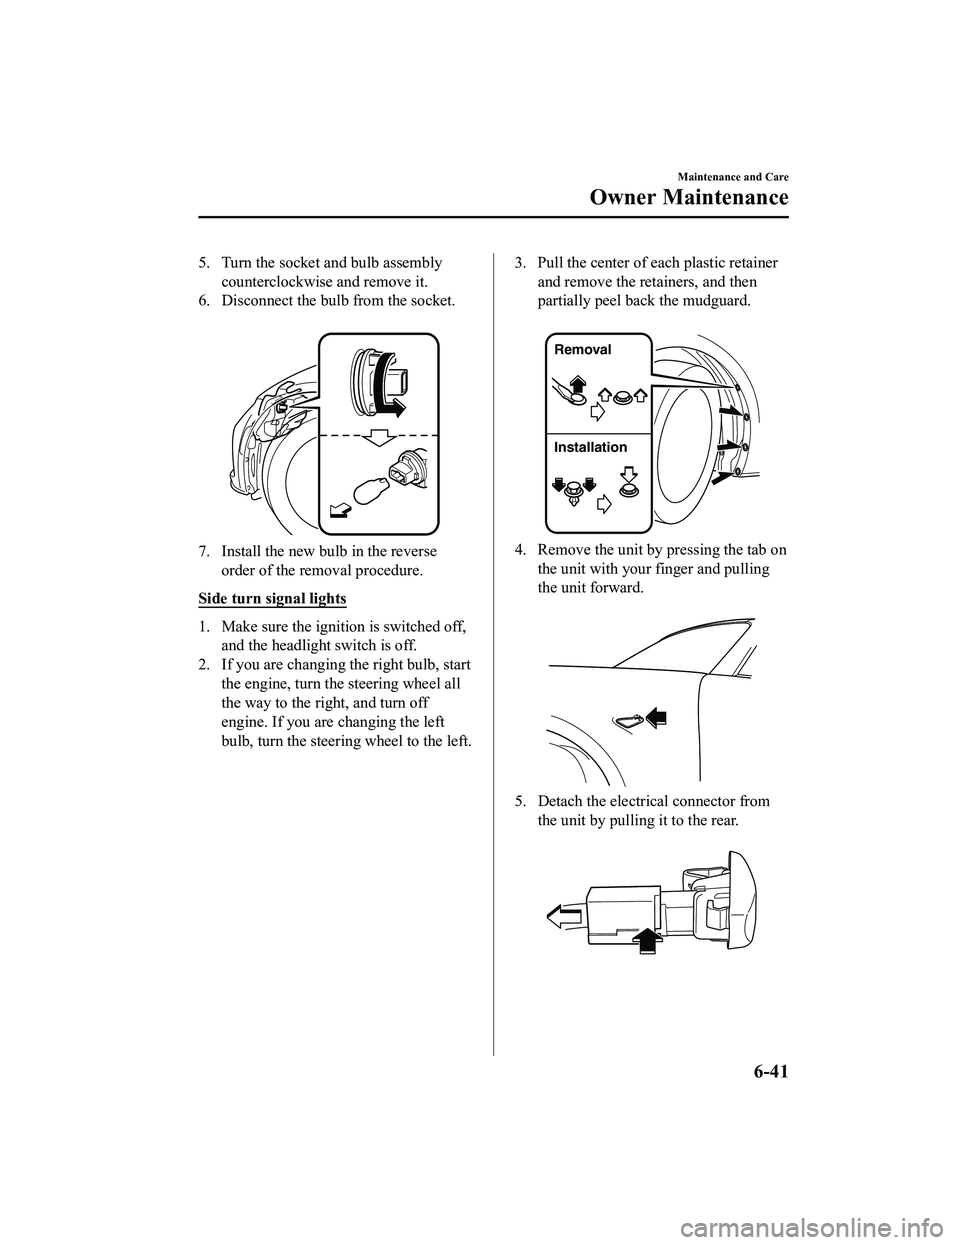 MAZDA MODEL MX-5 MIATA 2022  Owners Manual 5. Turn the socket and bulb assemblycounterclockwise and remove it.
6. Disconnect the bulb from the socket.
 
7. Install the new bulb in the reverseorder of the removal procedure.
Side turn signal lig